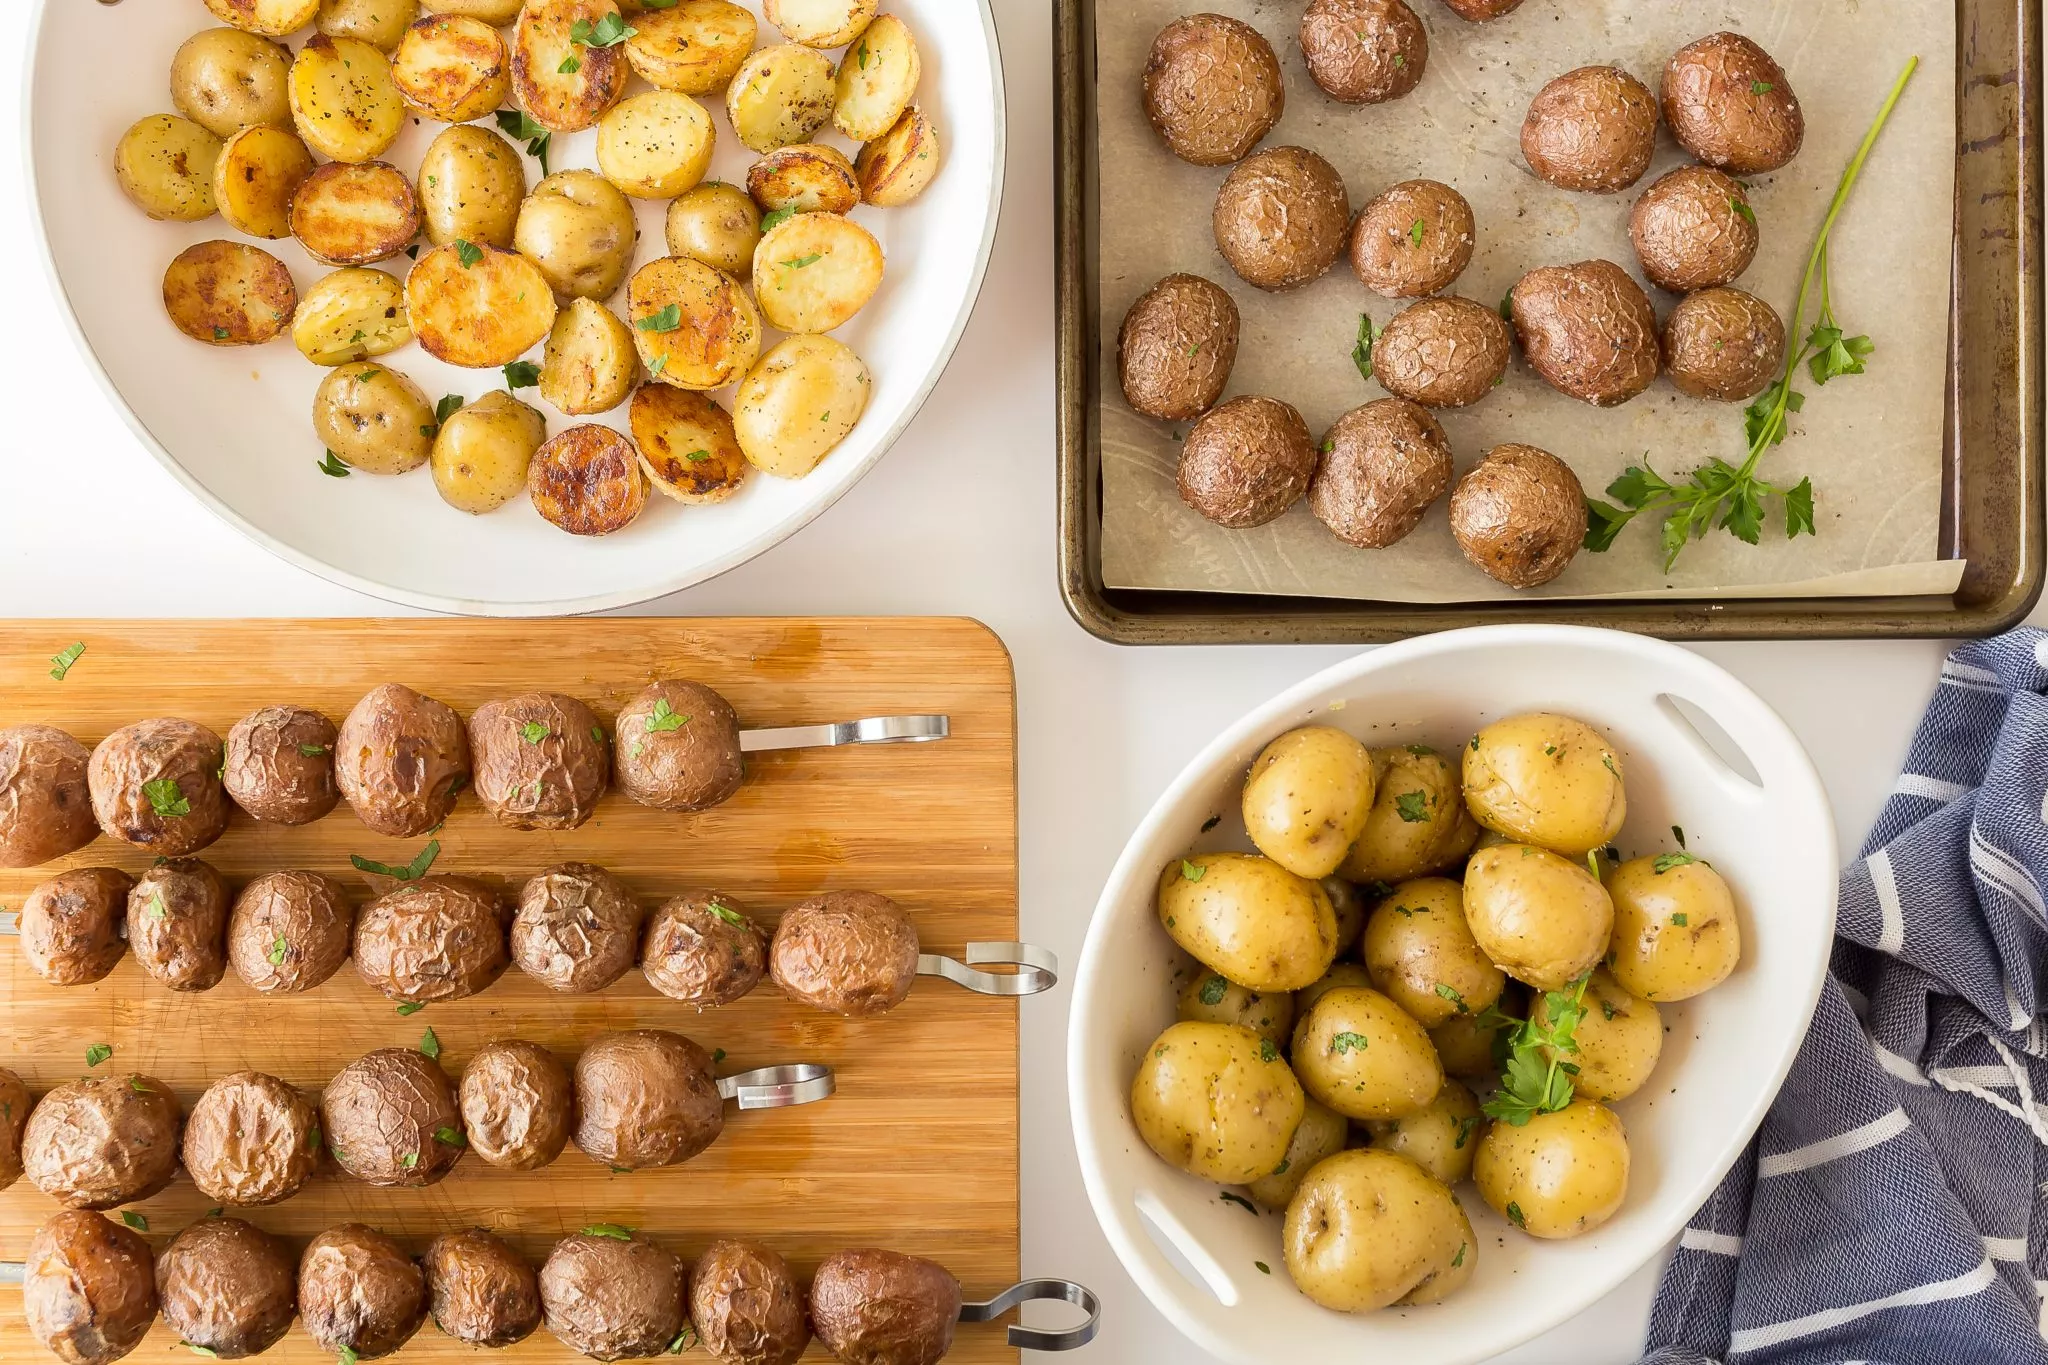 Little Potatoes in four different cooking methods: boiled, roasted, grilled, and pan-fried